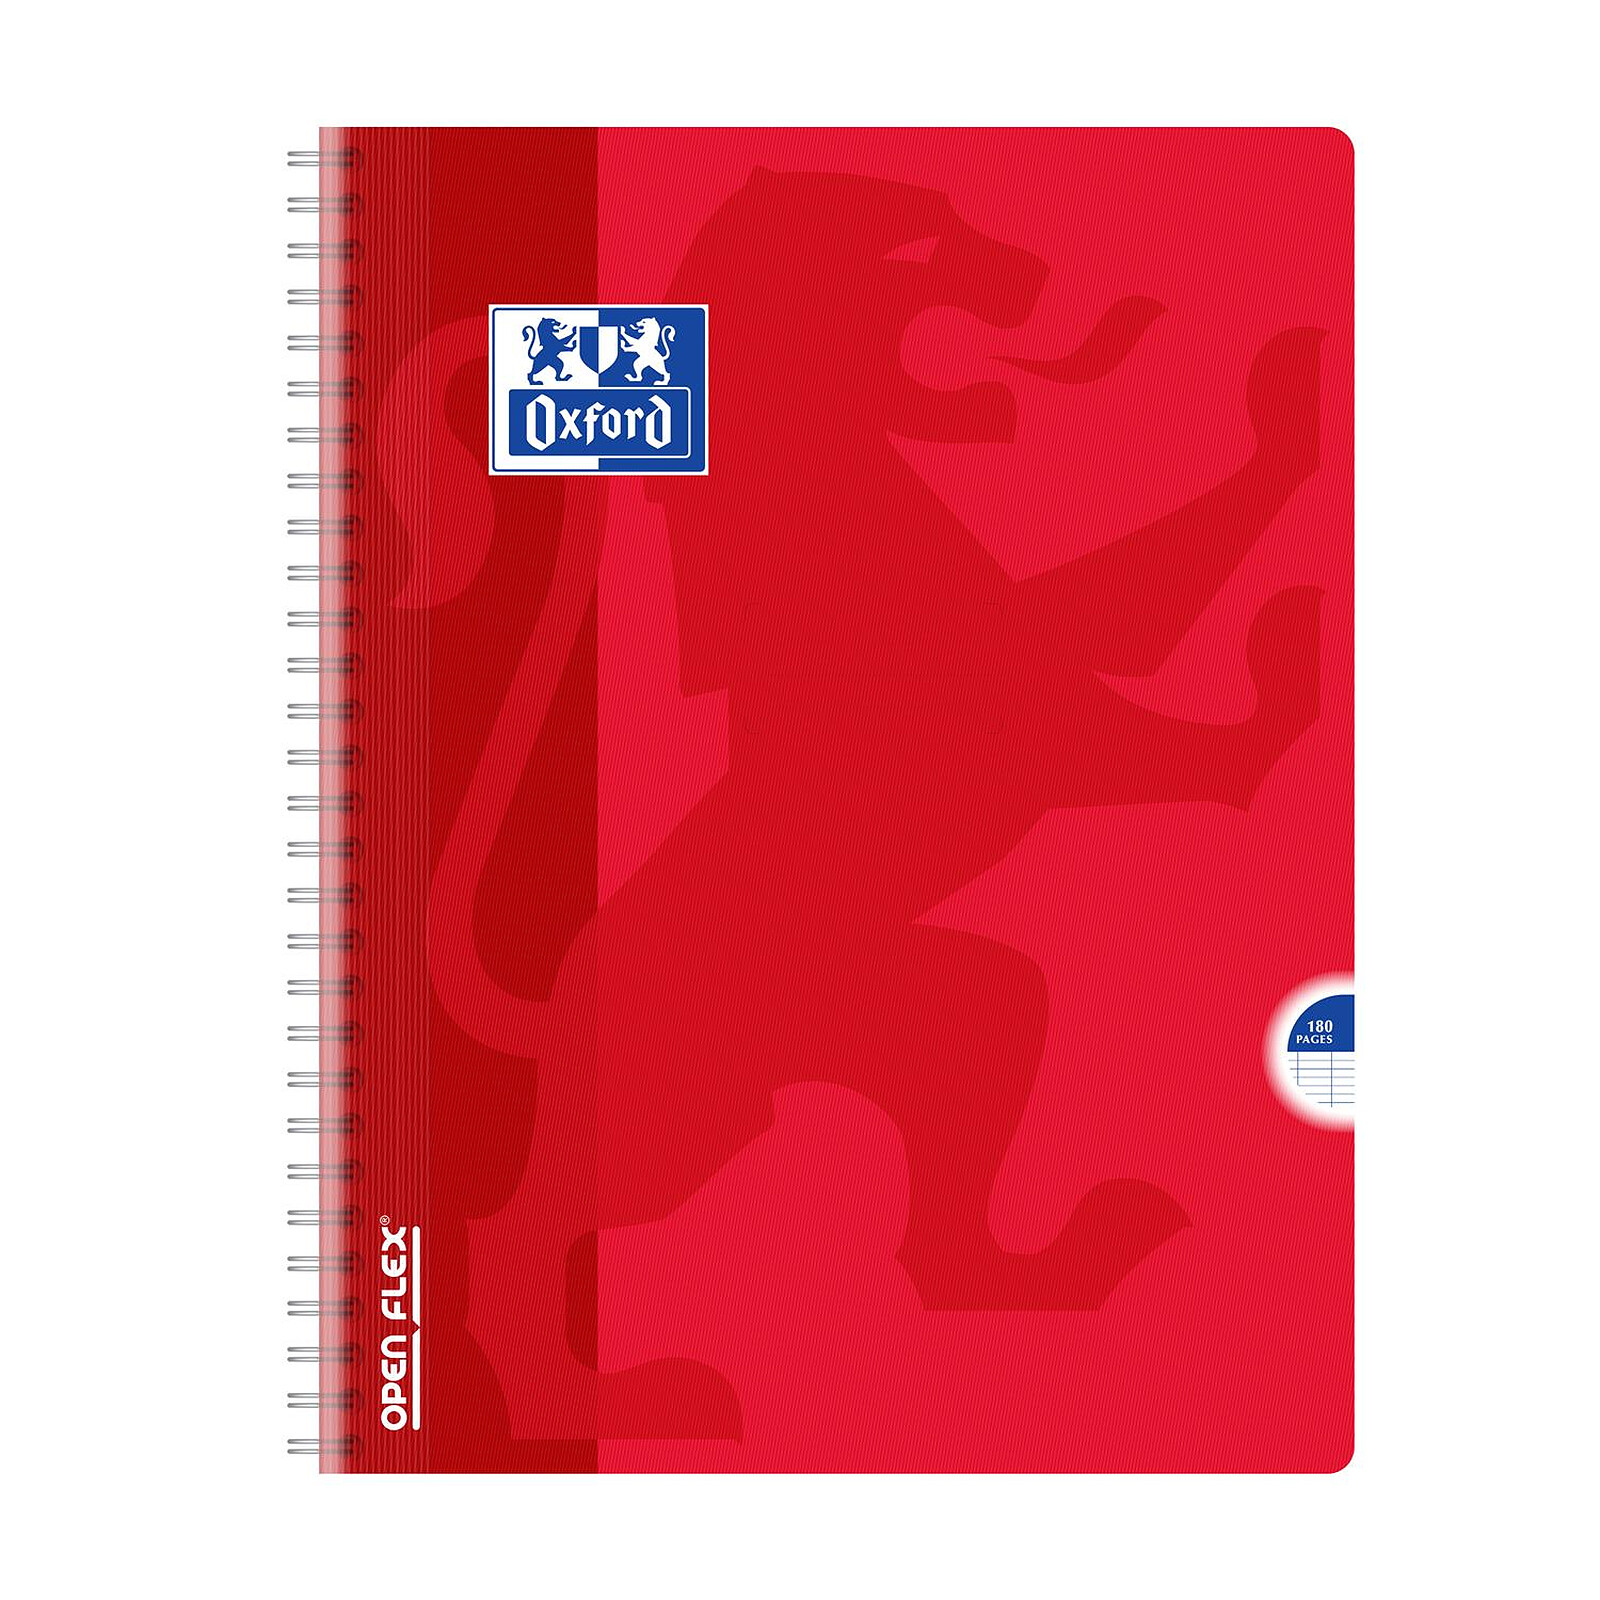 Cahier spirale 24x32cm 100 pages grands carreaux Clairefontaine